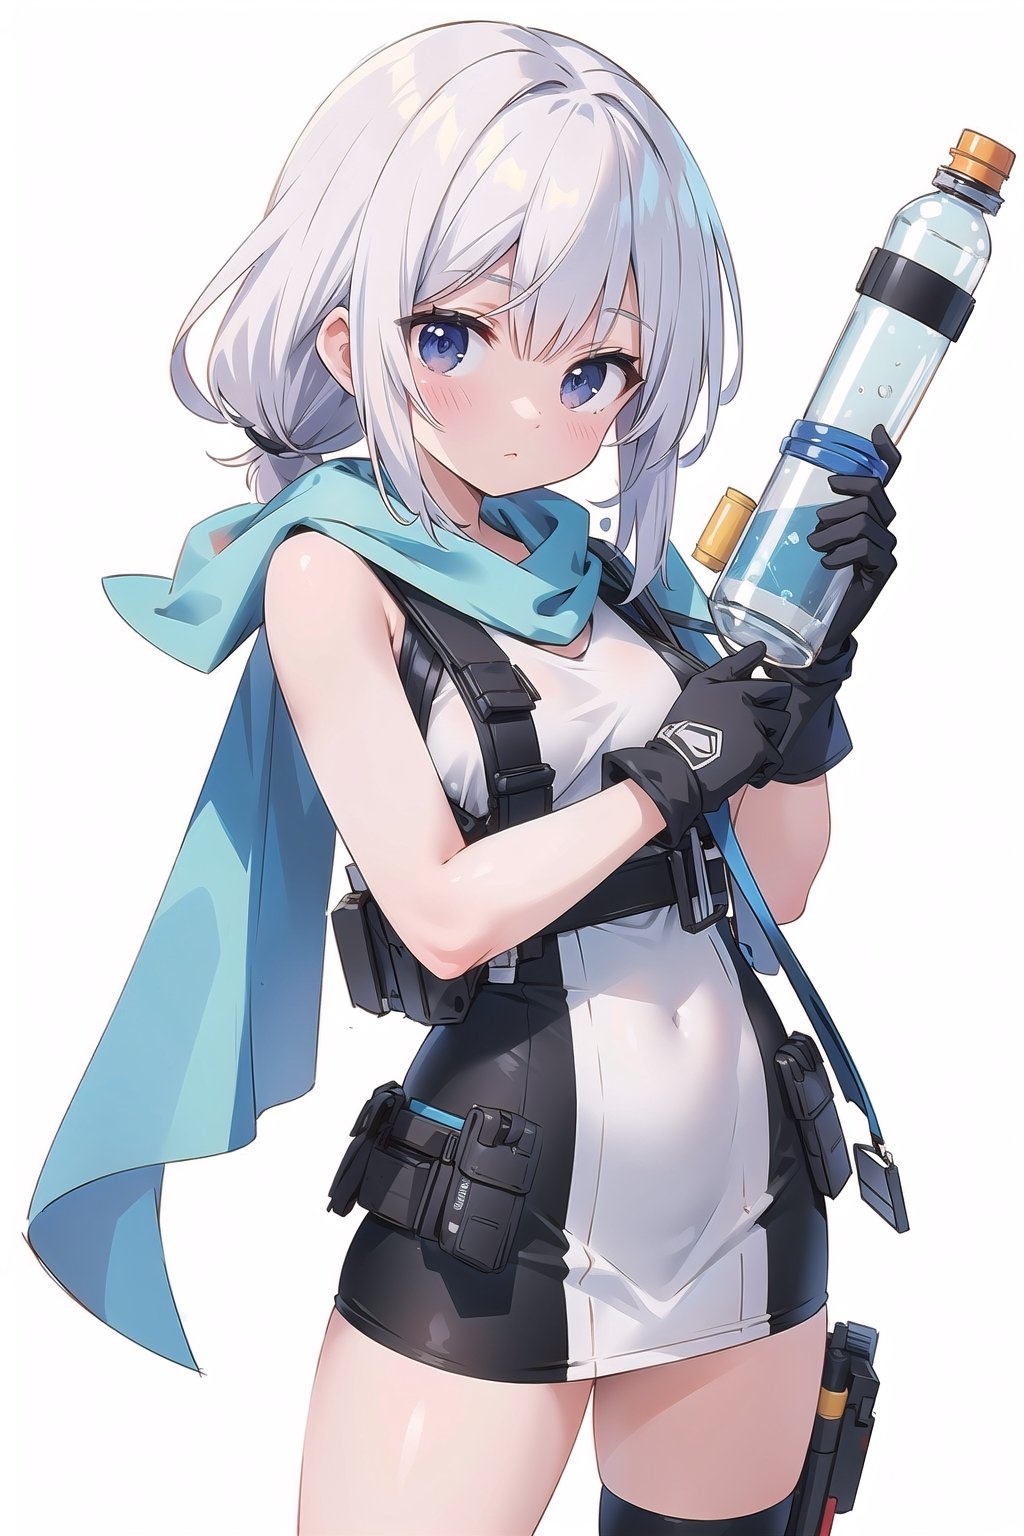 (masterpiece, best quality, highres:1.3), ultra resolution image, female character in construction gear, holding a hammer, towel draped over her shoulder, carrying a water bottle, wearing gloves, white background